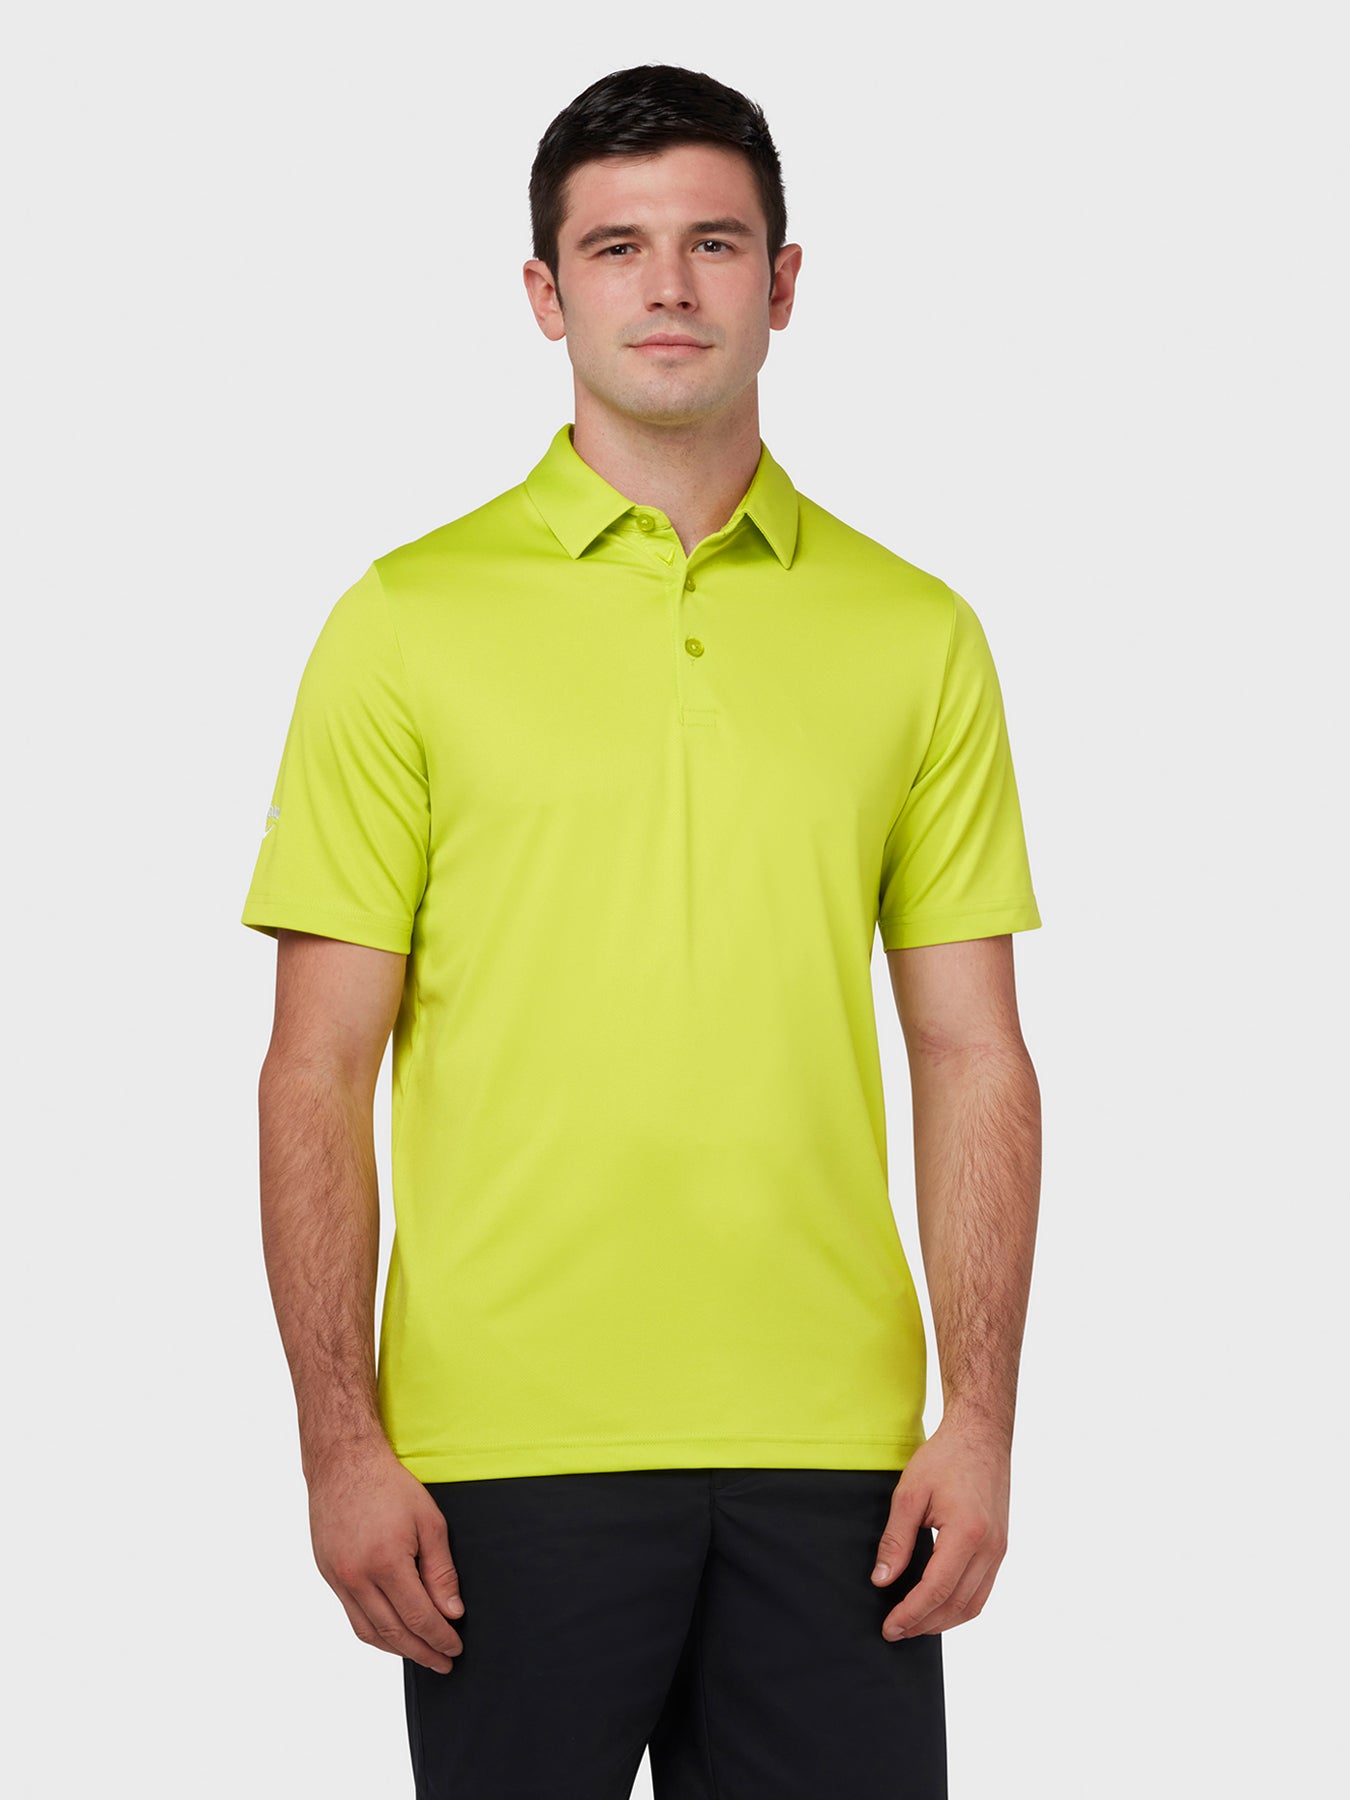 View Swing Tech Tour Polo In Surreal Green Surreal Green XS information